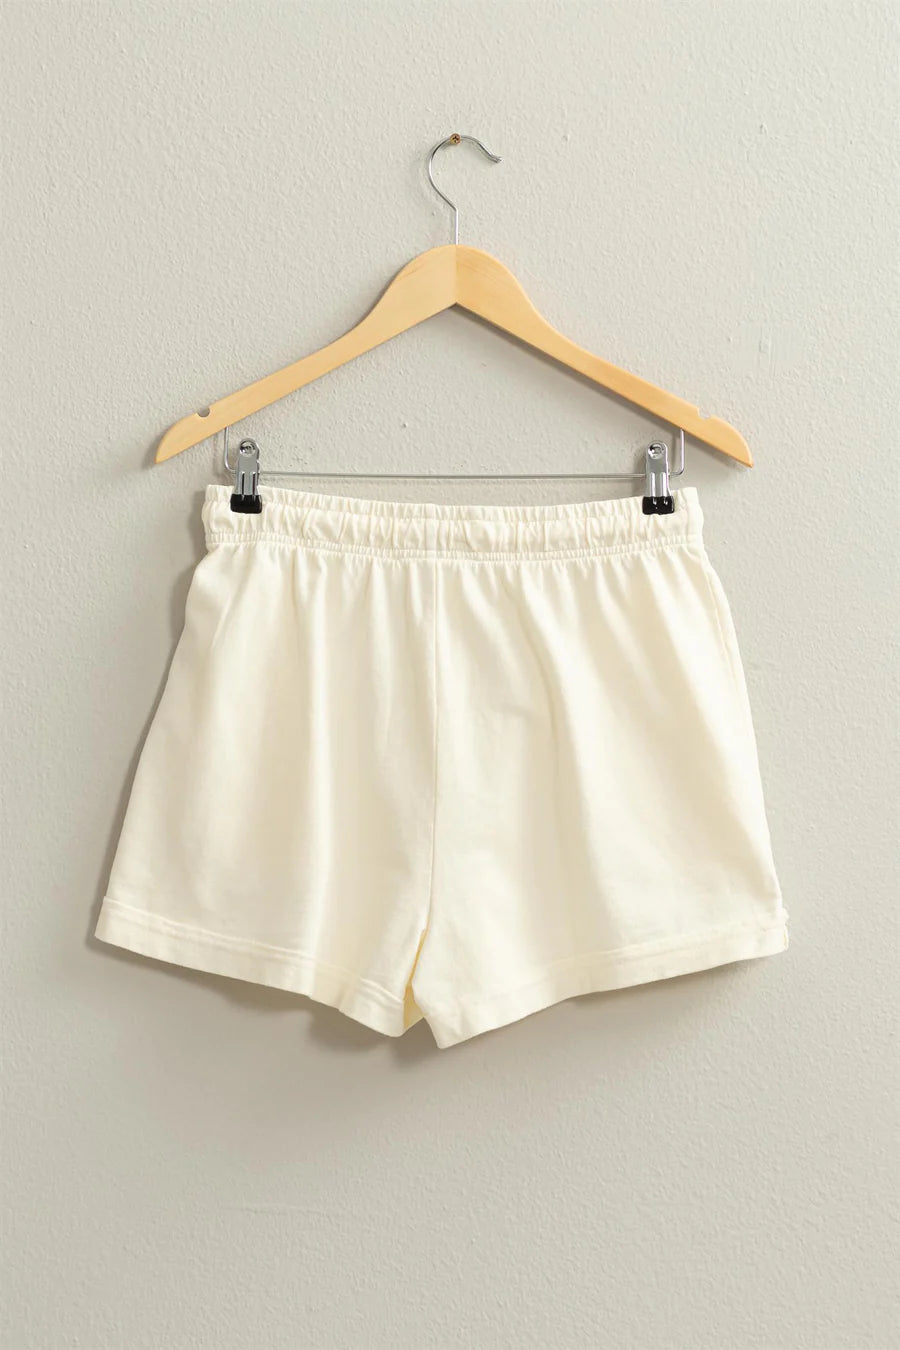 Knit Shorts in 3 Colors